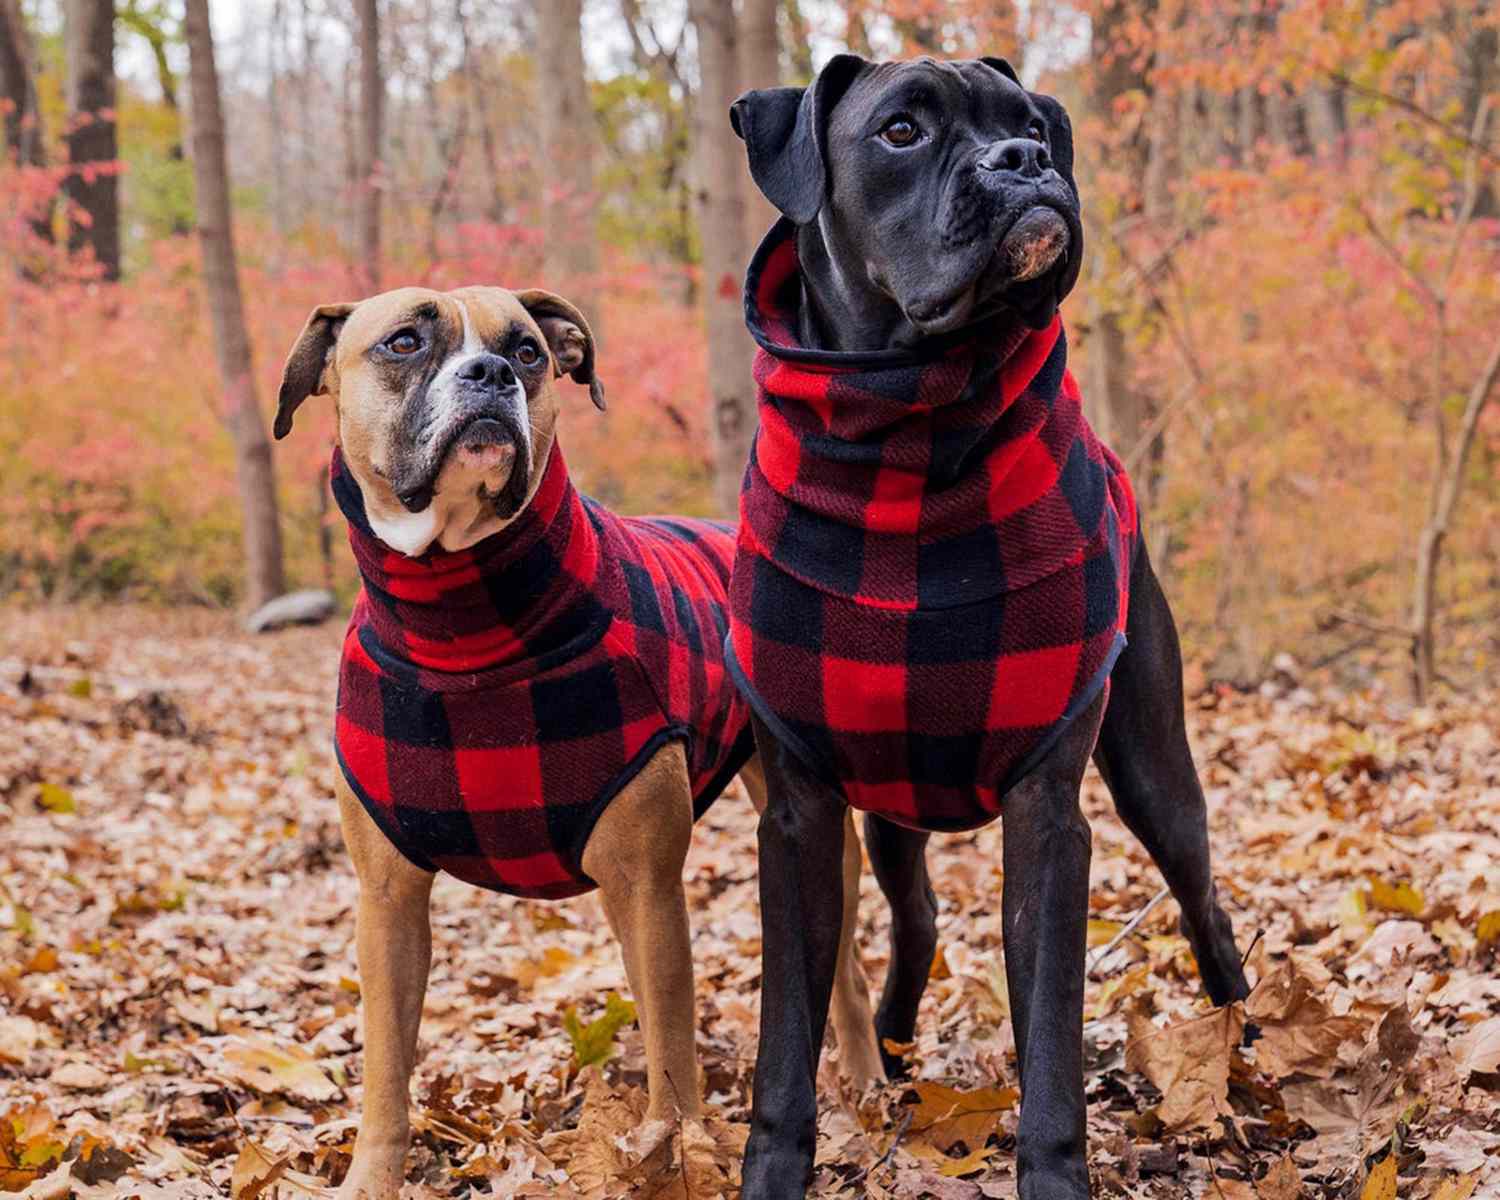 12 Dog Christmas Sweaters to Bring More Cheer This Year | Daily